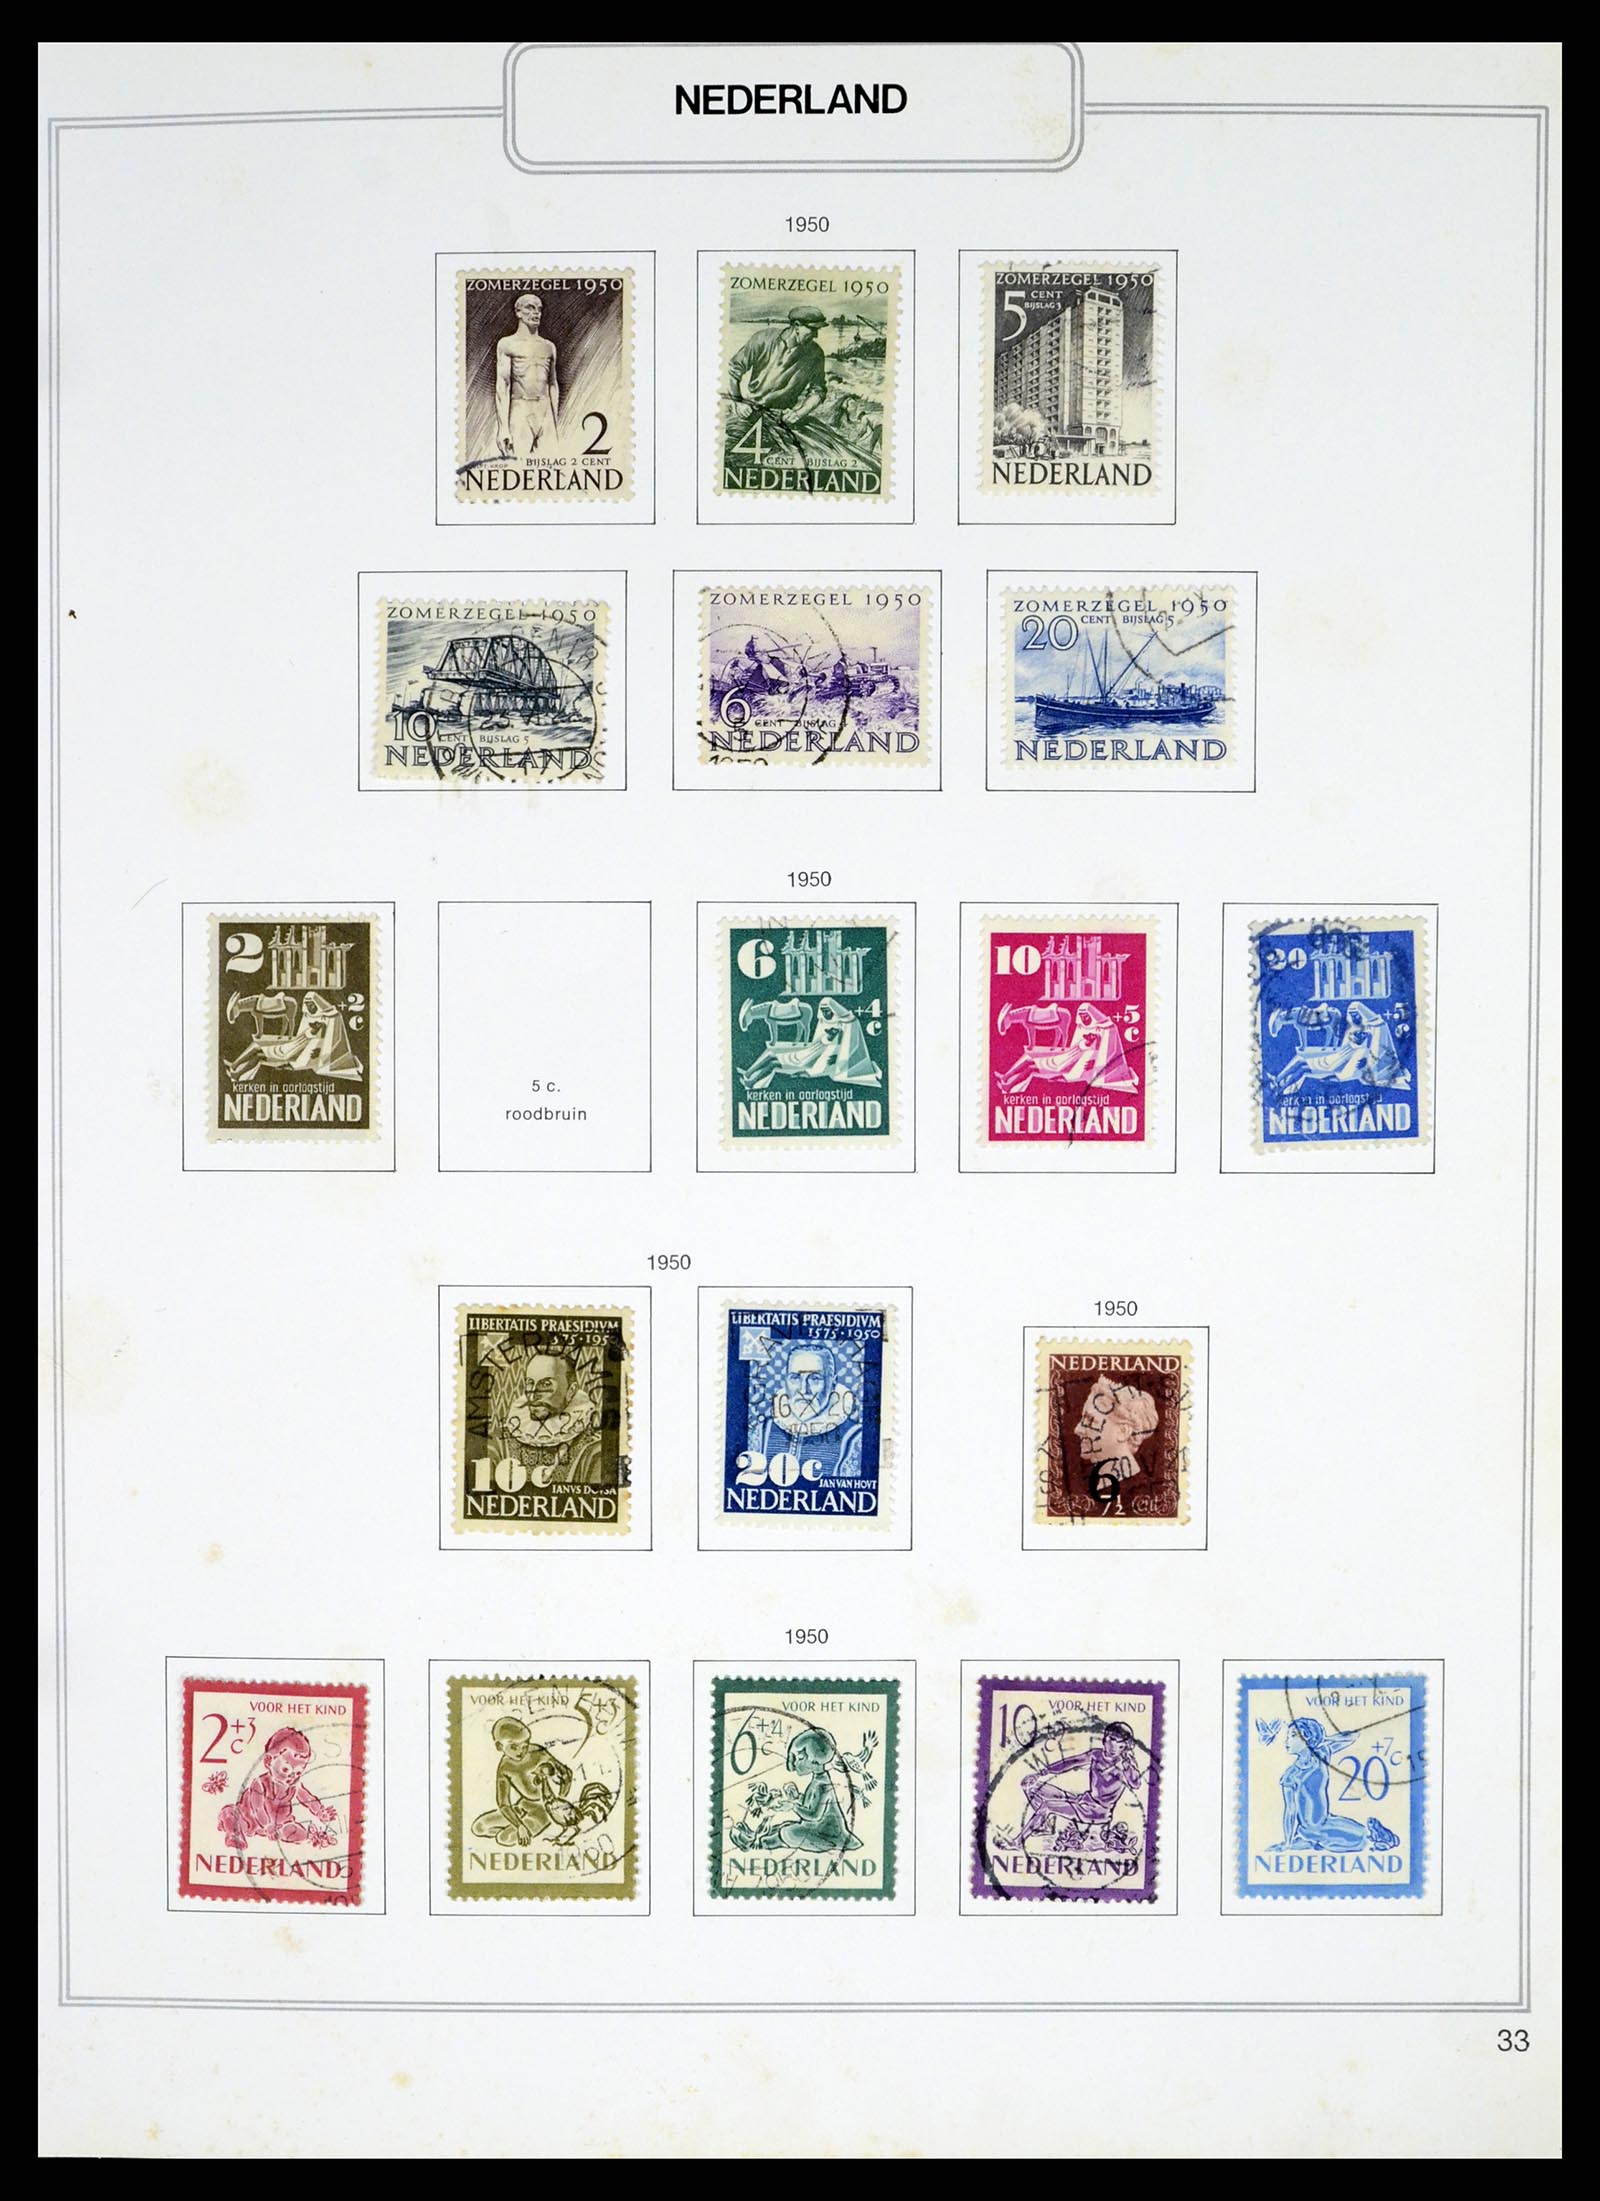 37348 033 - Stamp collection 37348 Netherlands 1852-1995.